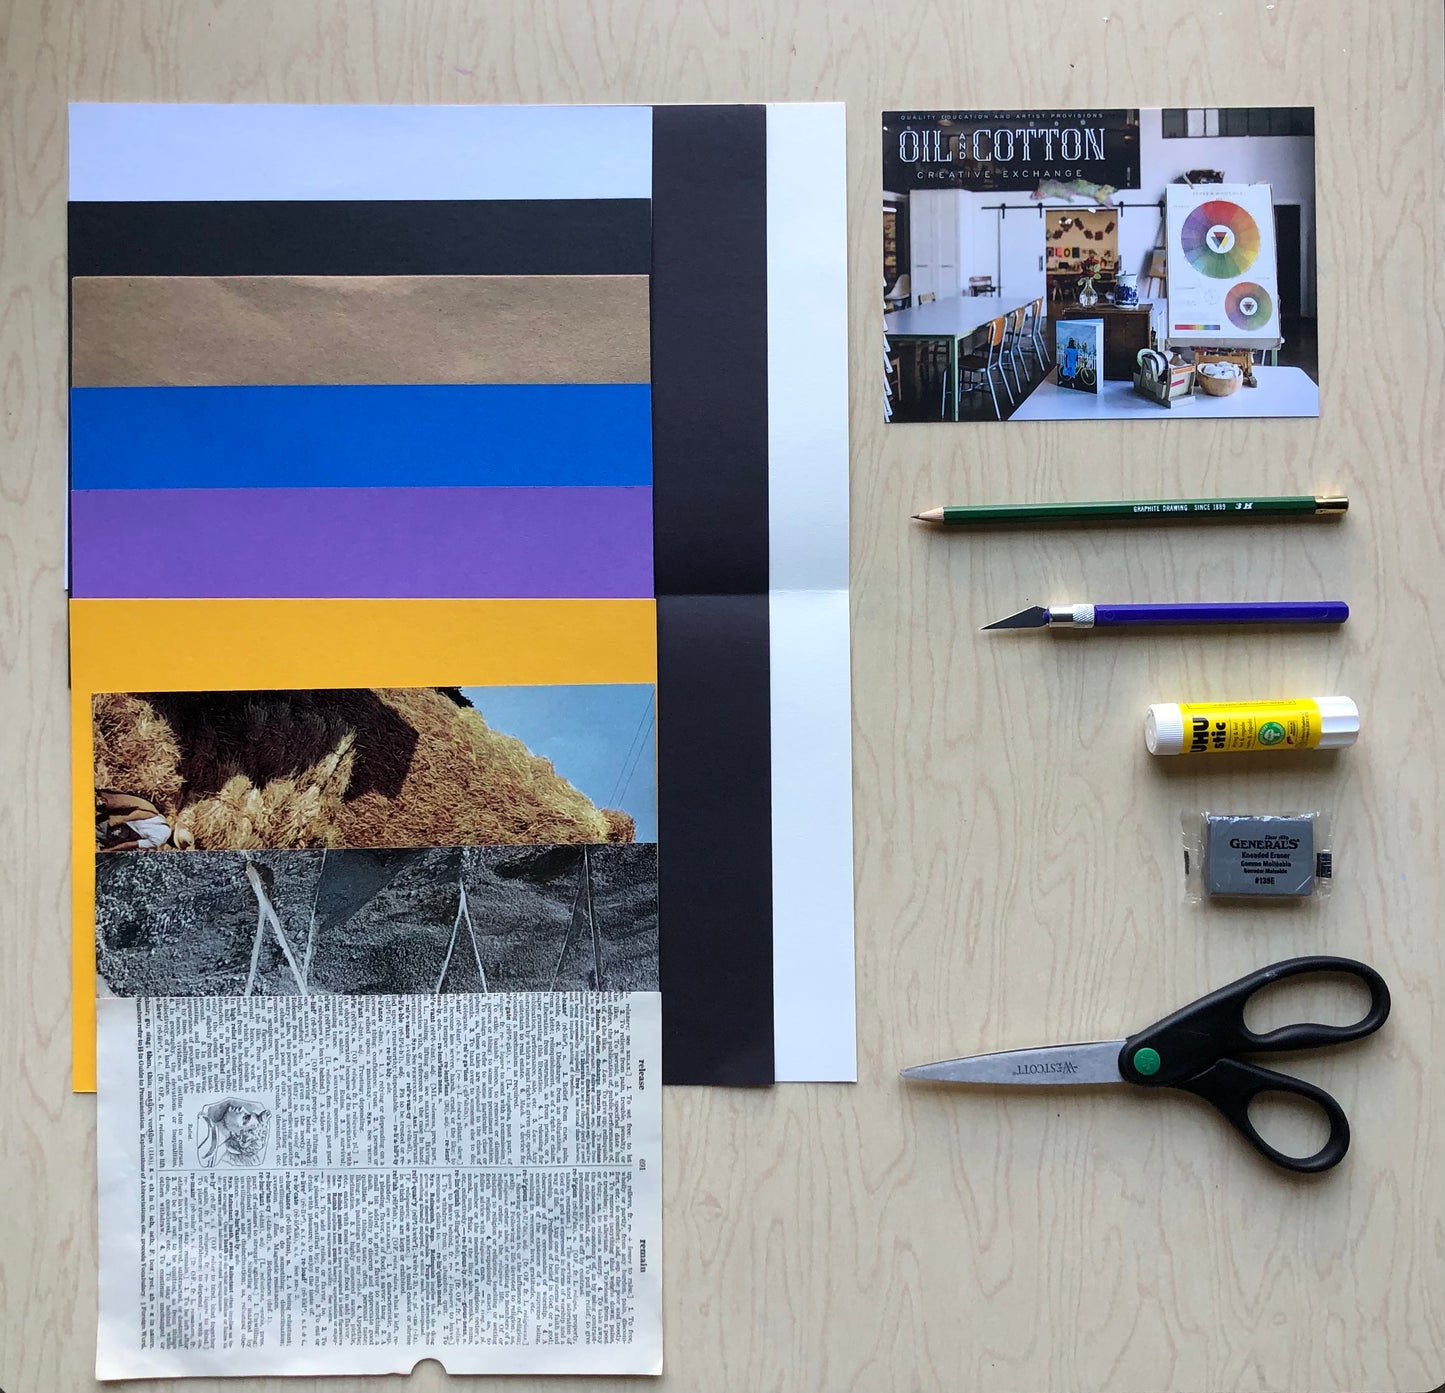 Capital One Kit: Vessel Collage with Shannon Driscoll